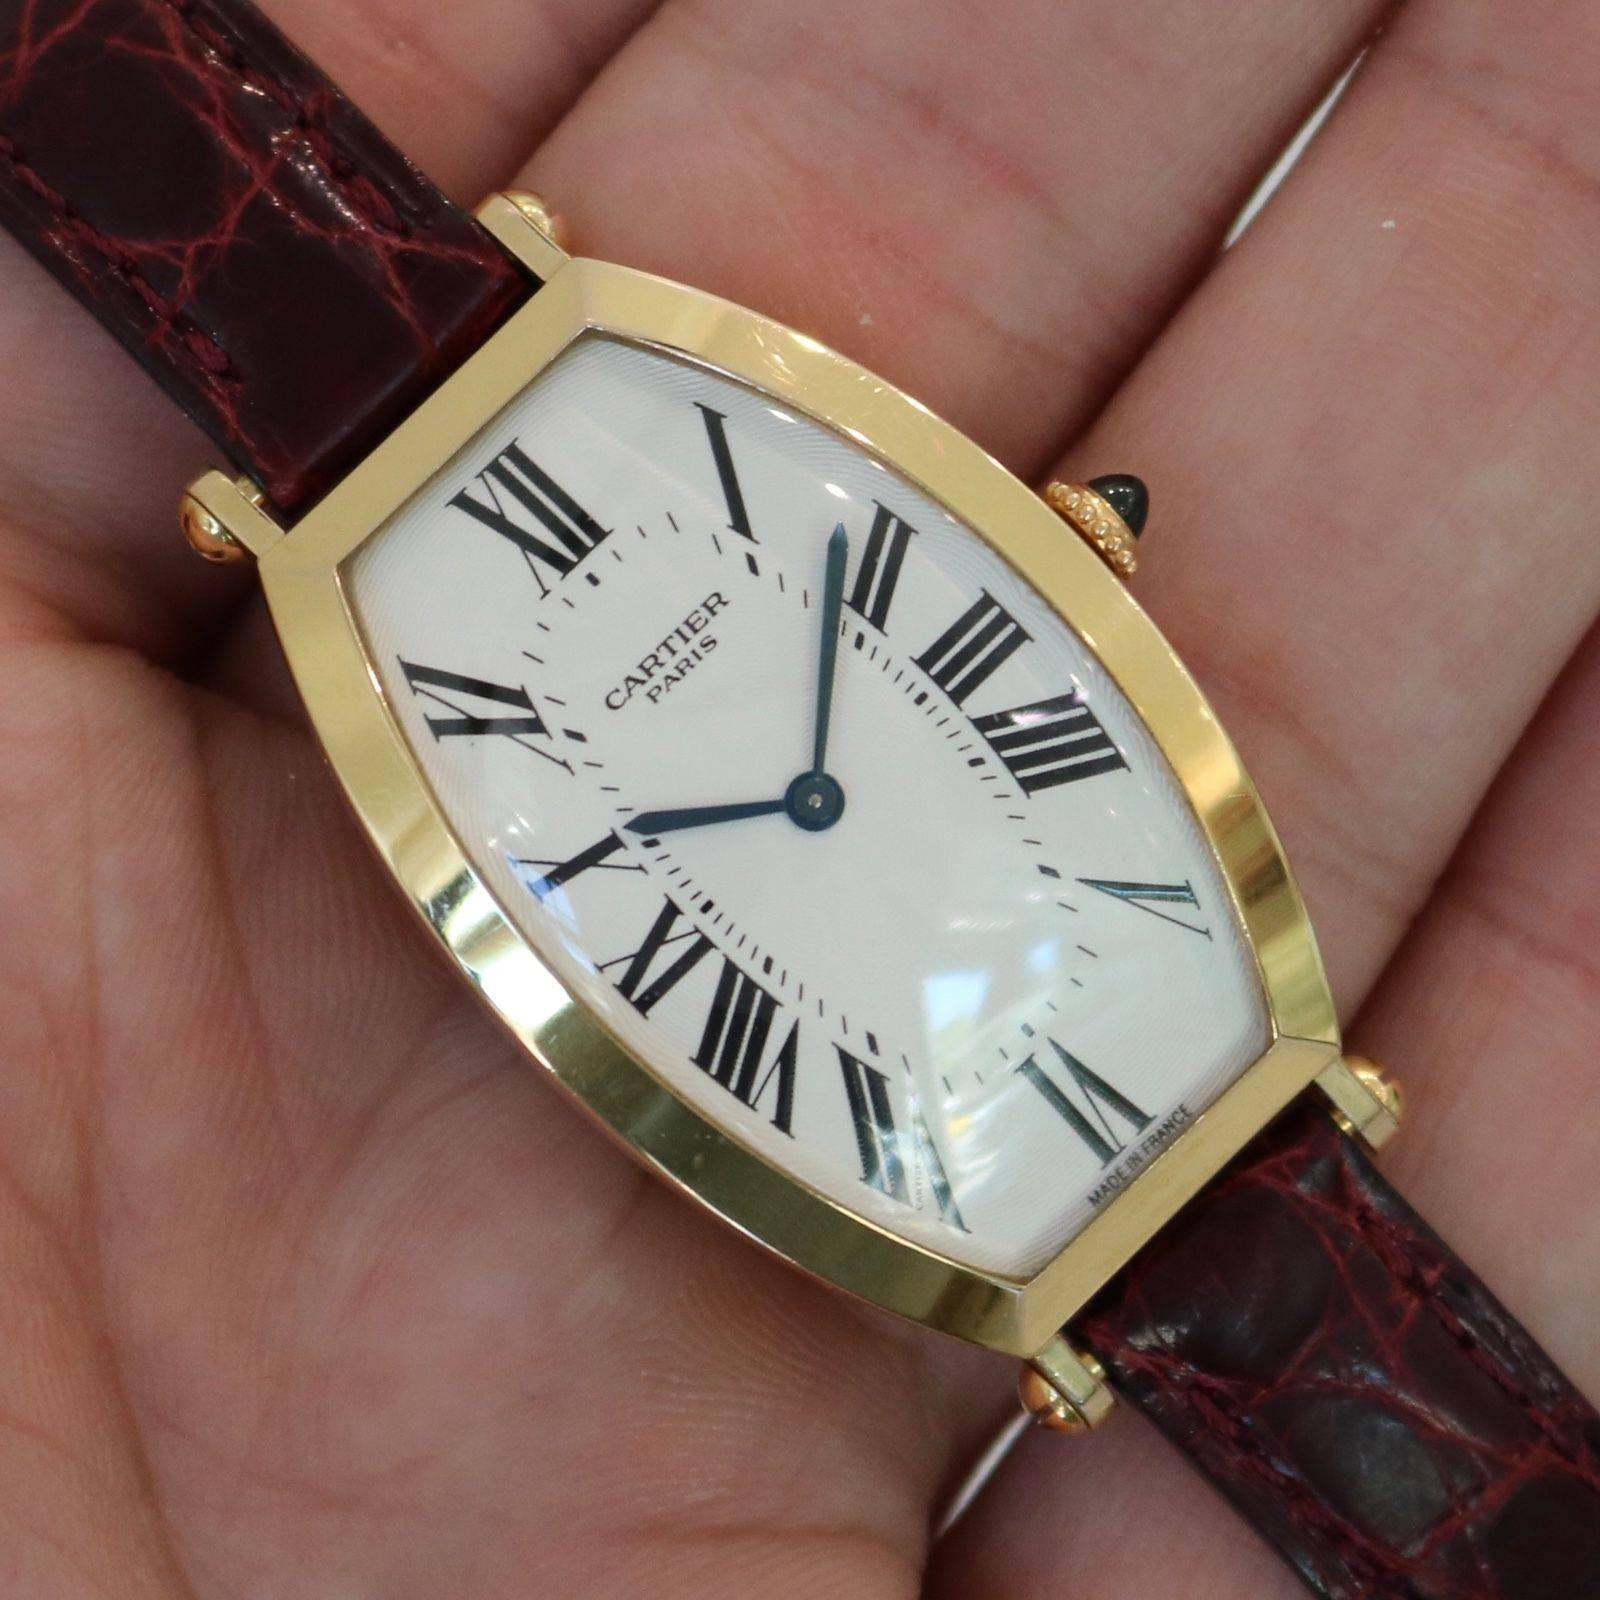 Brand Name:  Cartier
Style Number:  2458C
Series:  Tonneau "Privée Collection"
Gender:  Unisex
Case Material:  18k Yellow Gold
Dial Color:  Silver Guilloche
Movement:  Mechanical
Engine:  Cal. 78/1
Functions:  Hours, Minutes
Crystal